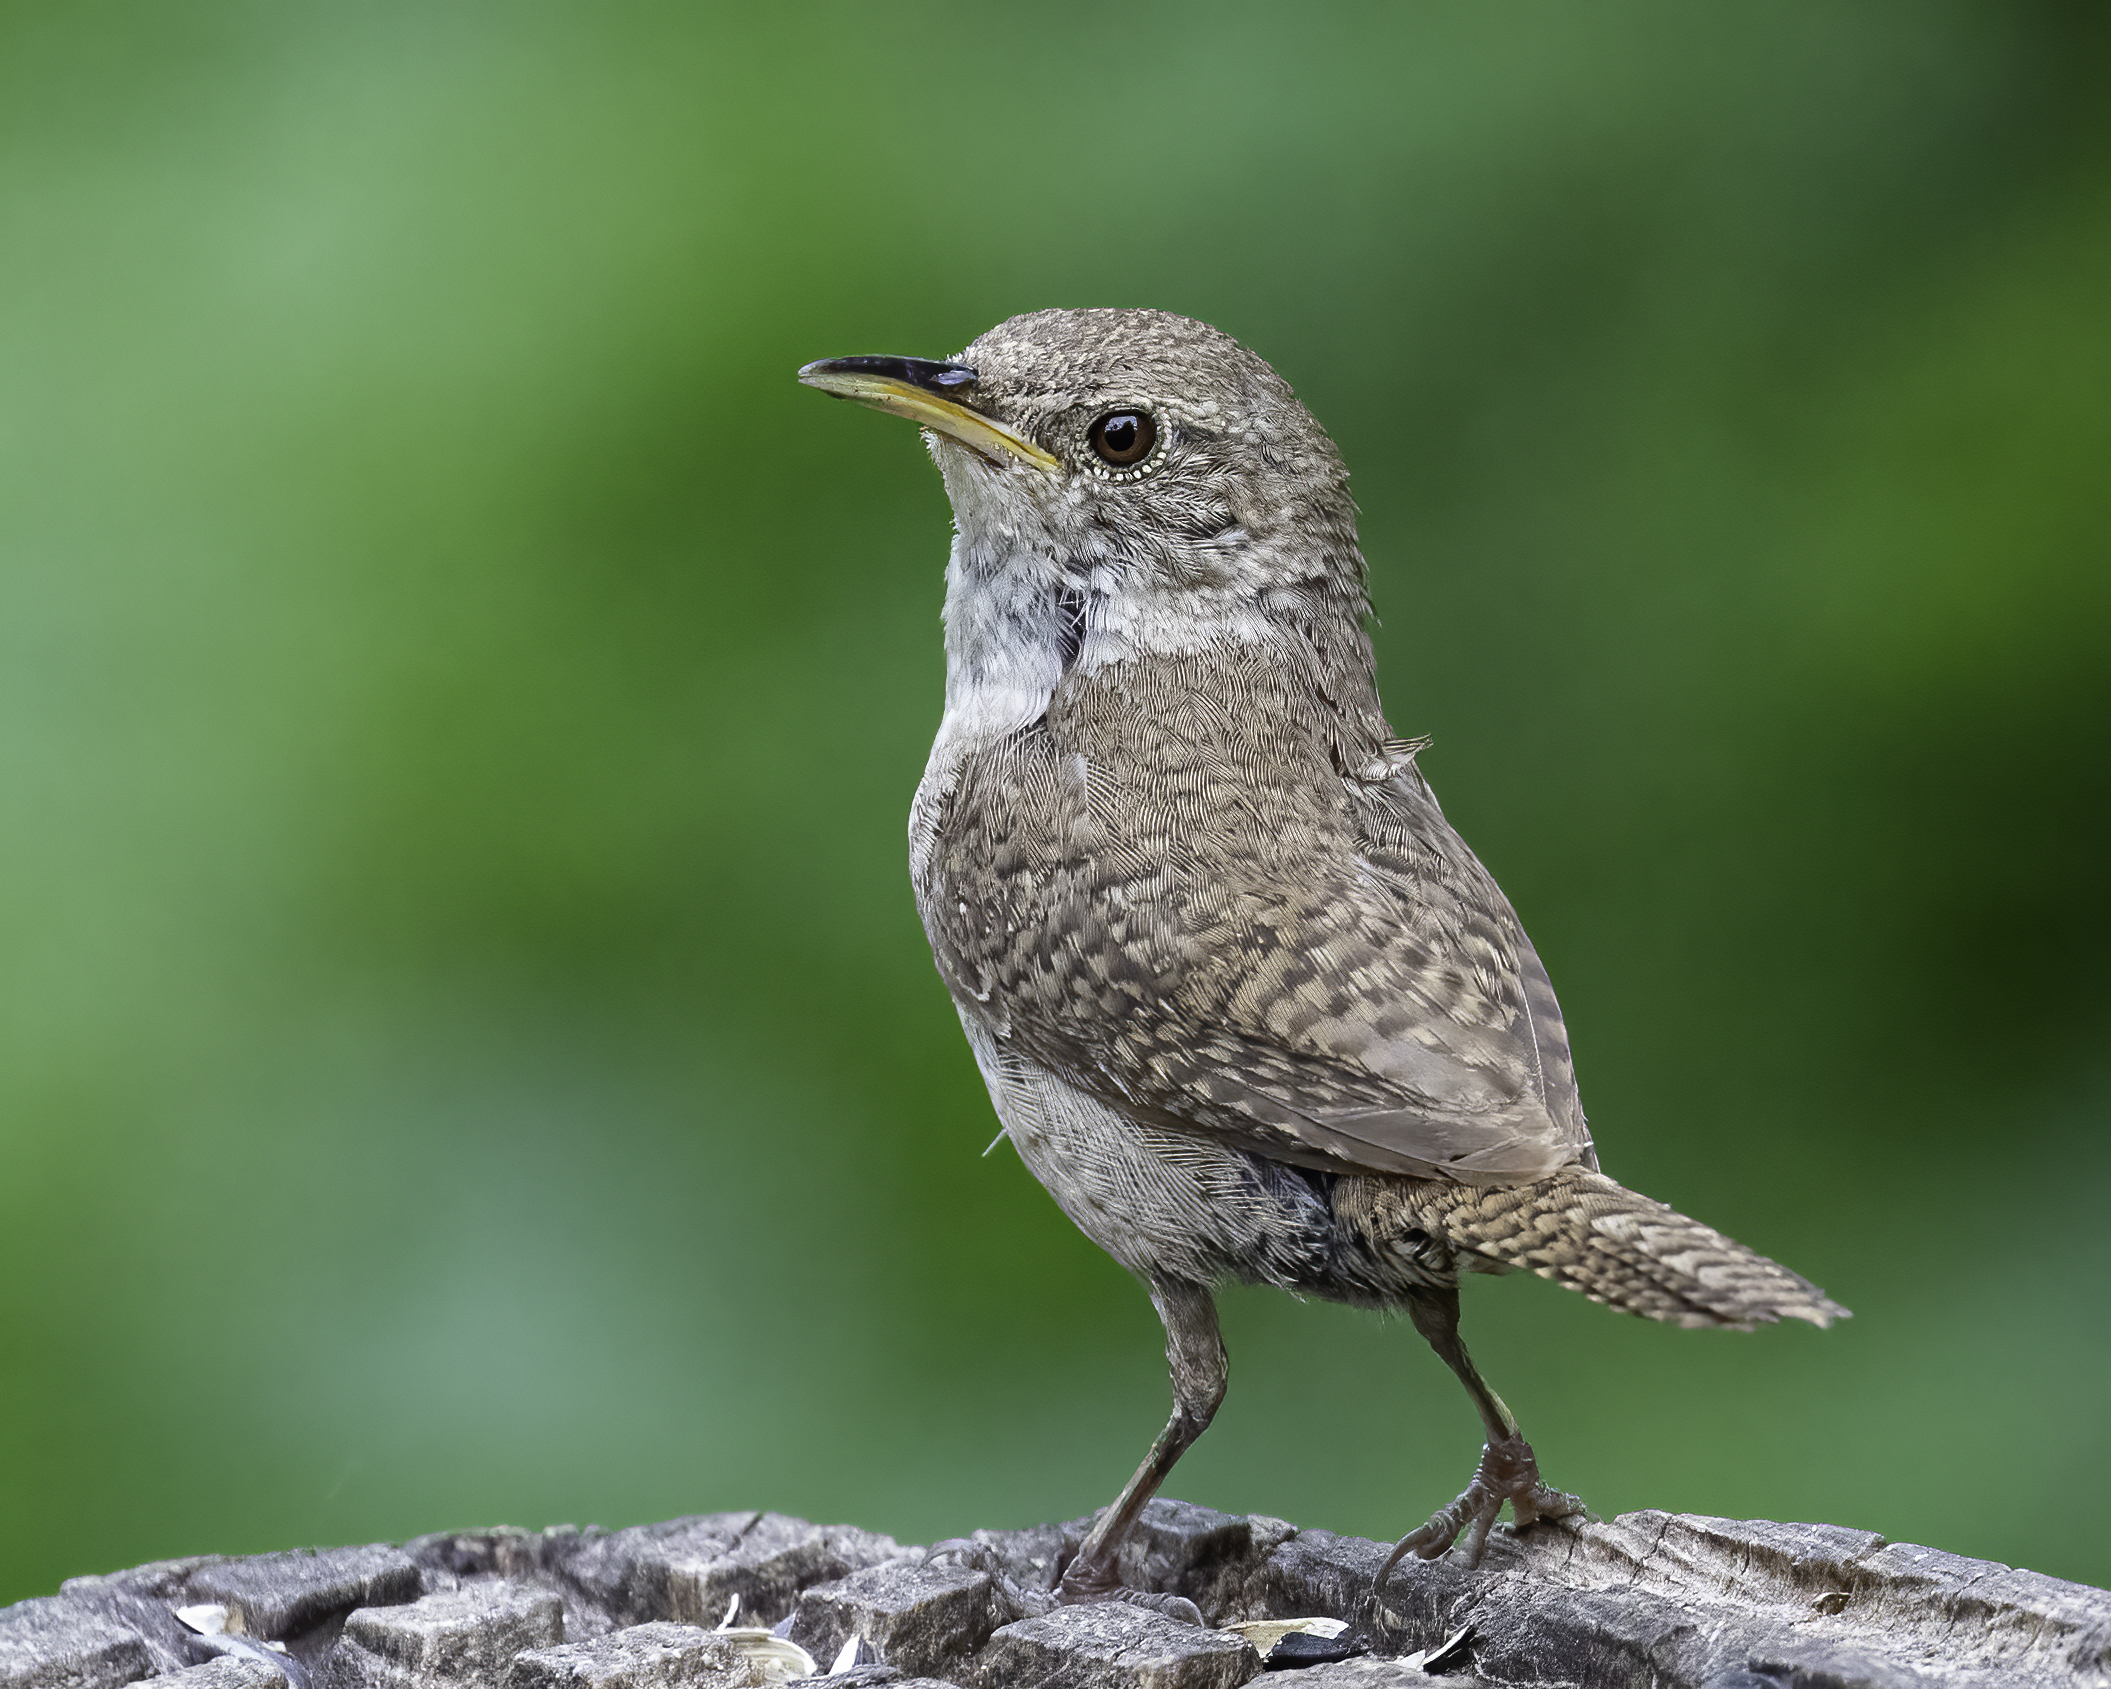 The house wren, a small and cute bird